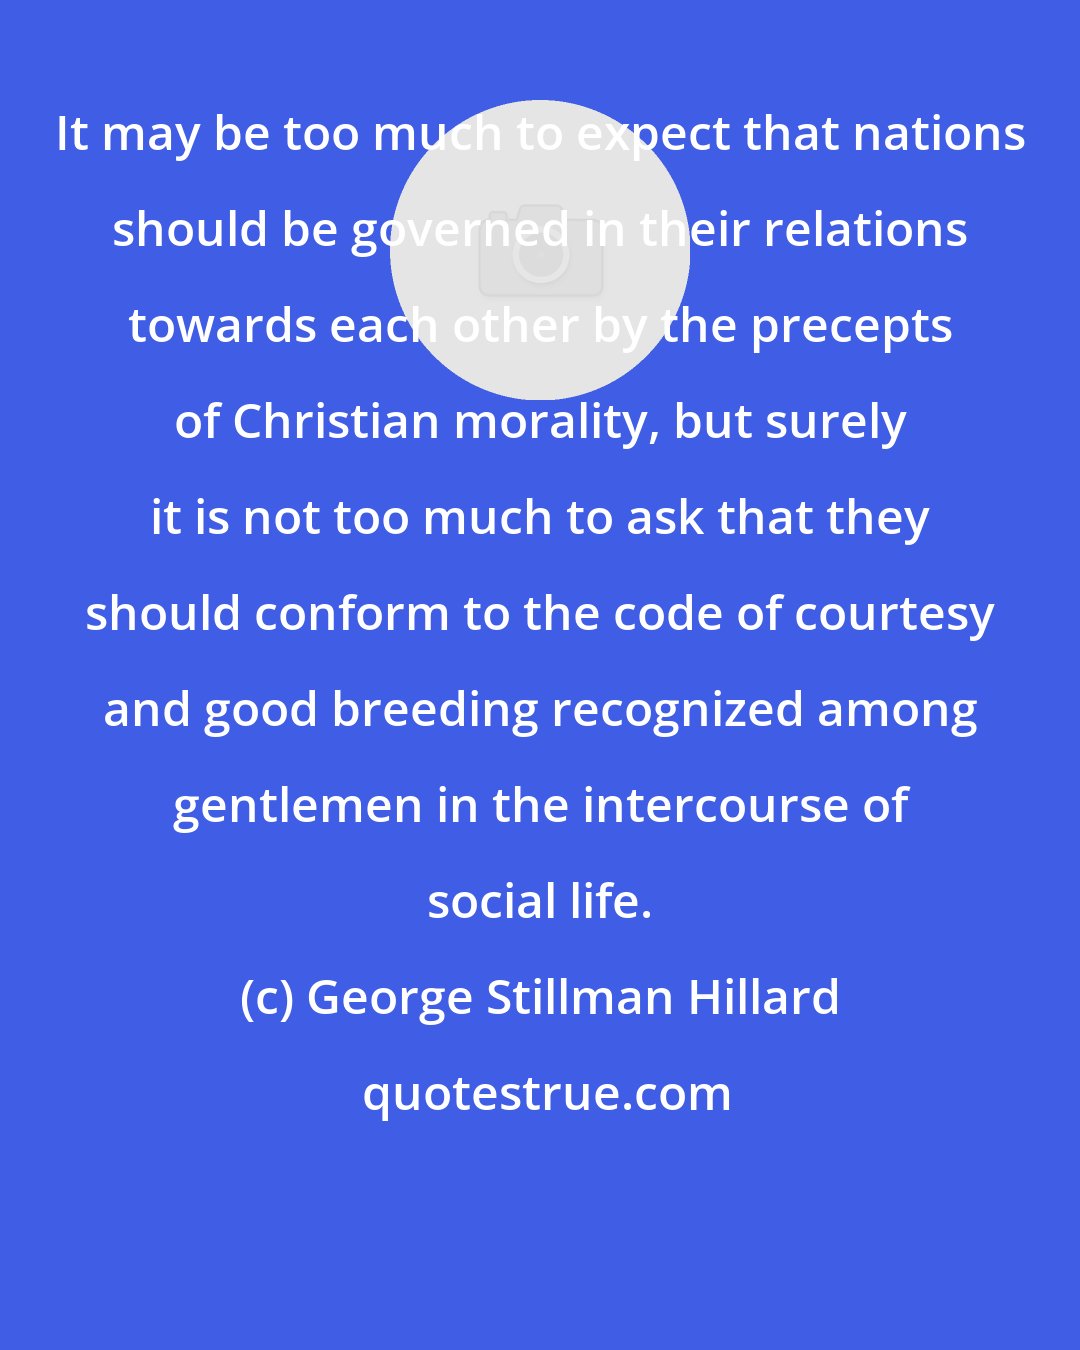 George Stillman Hillard: It may be too much to expect that nations should be governed in their relations towards each other by the precepts of Christian morality, but surely it is not too much to ask that they should conform to the code of courtesy and good breeding recognized among gentlemen in the intercourse of social life.